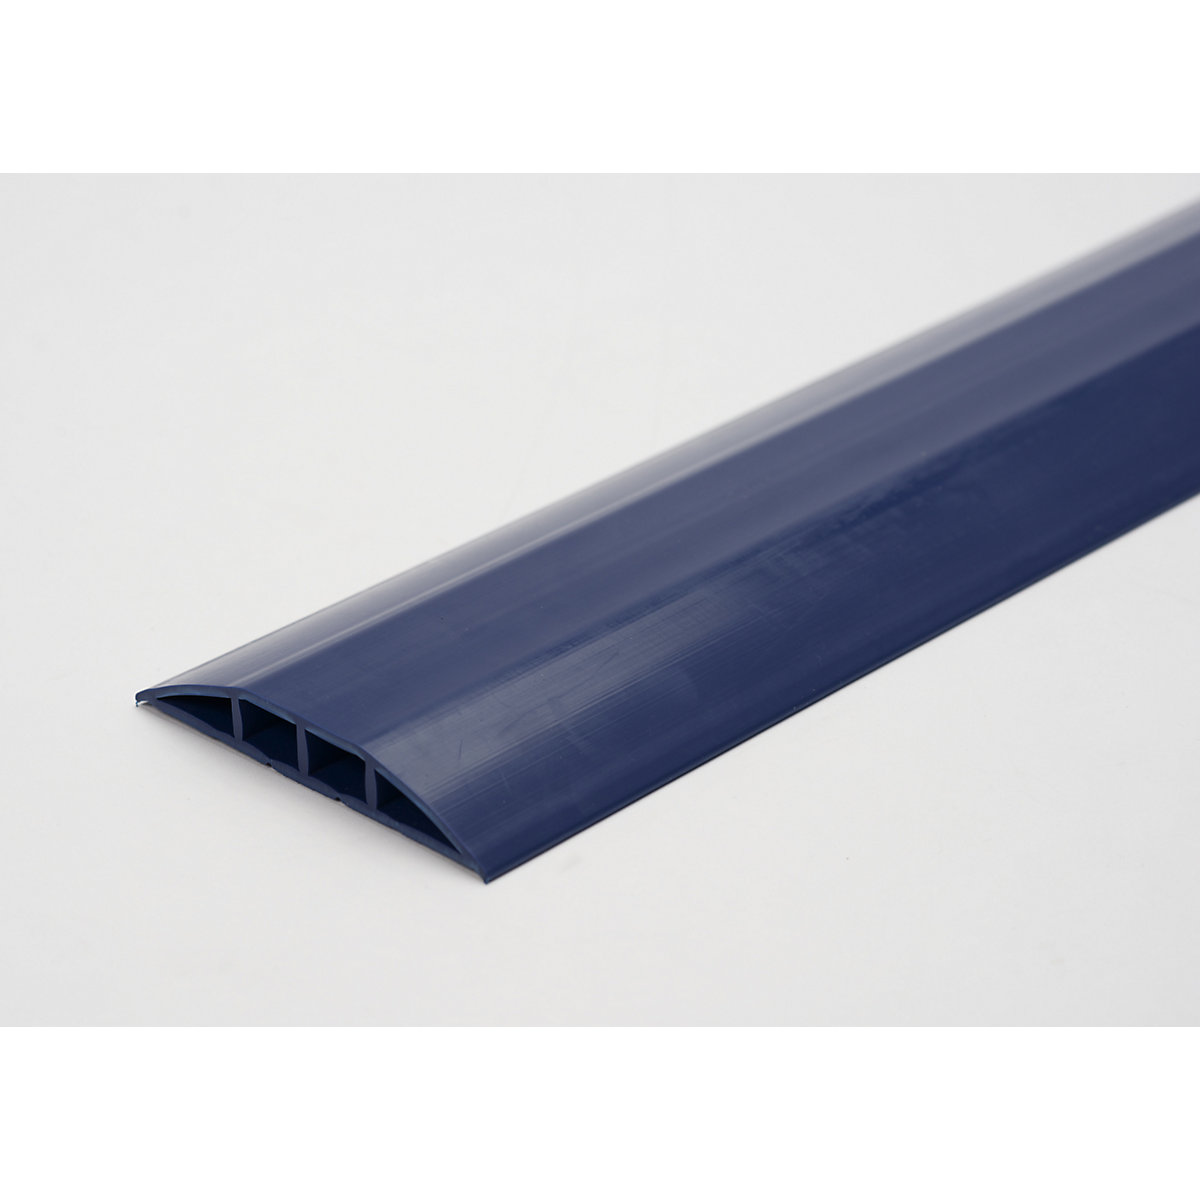 Plastic cable duct, for cables and hoses with Ø up to 7.5 mm, blue, 2 chambers, length 1.5 m-2